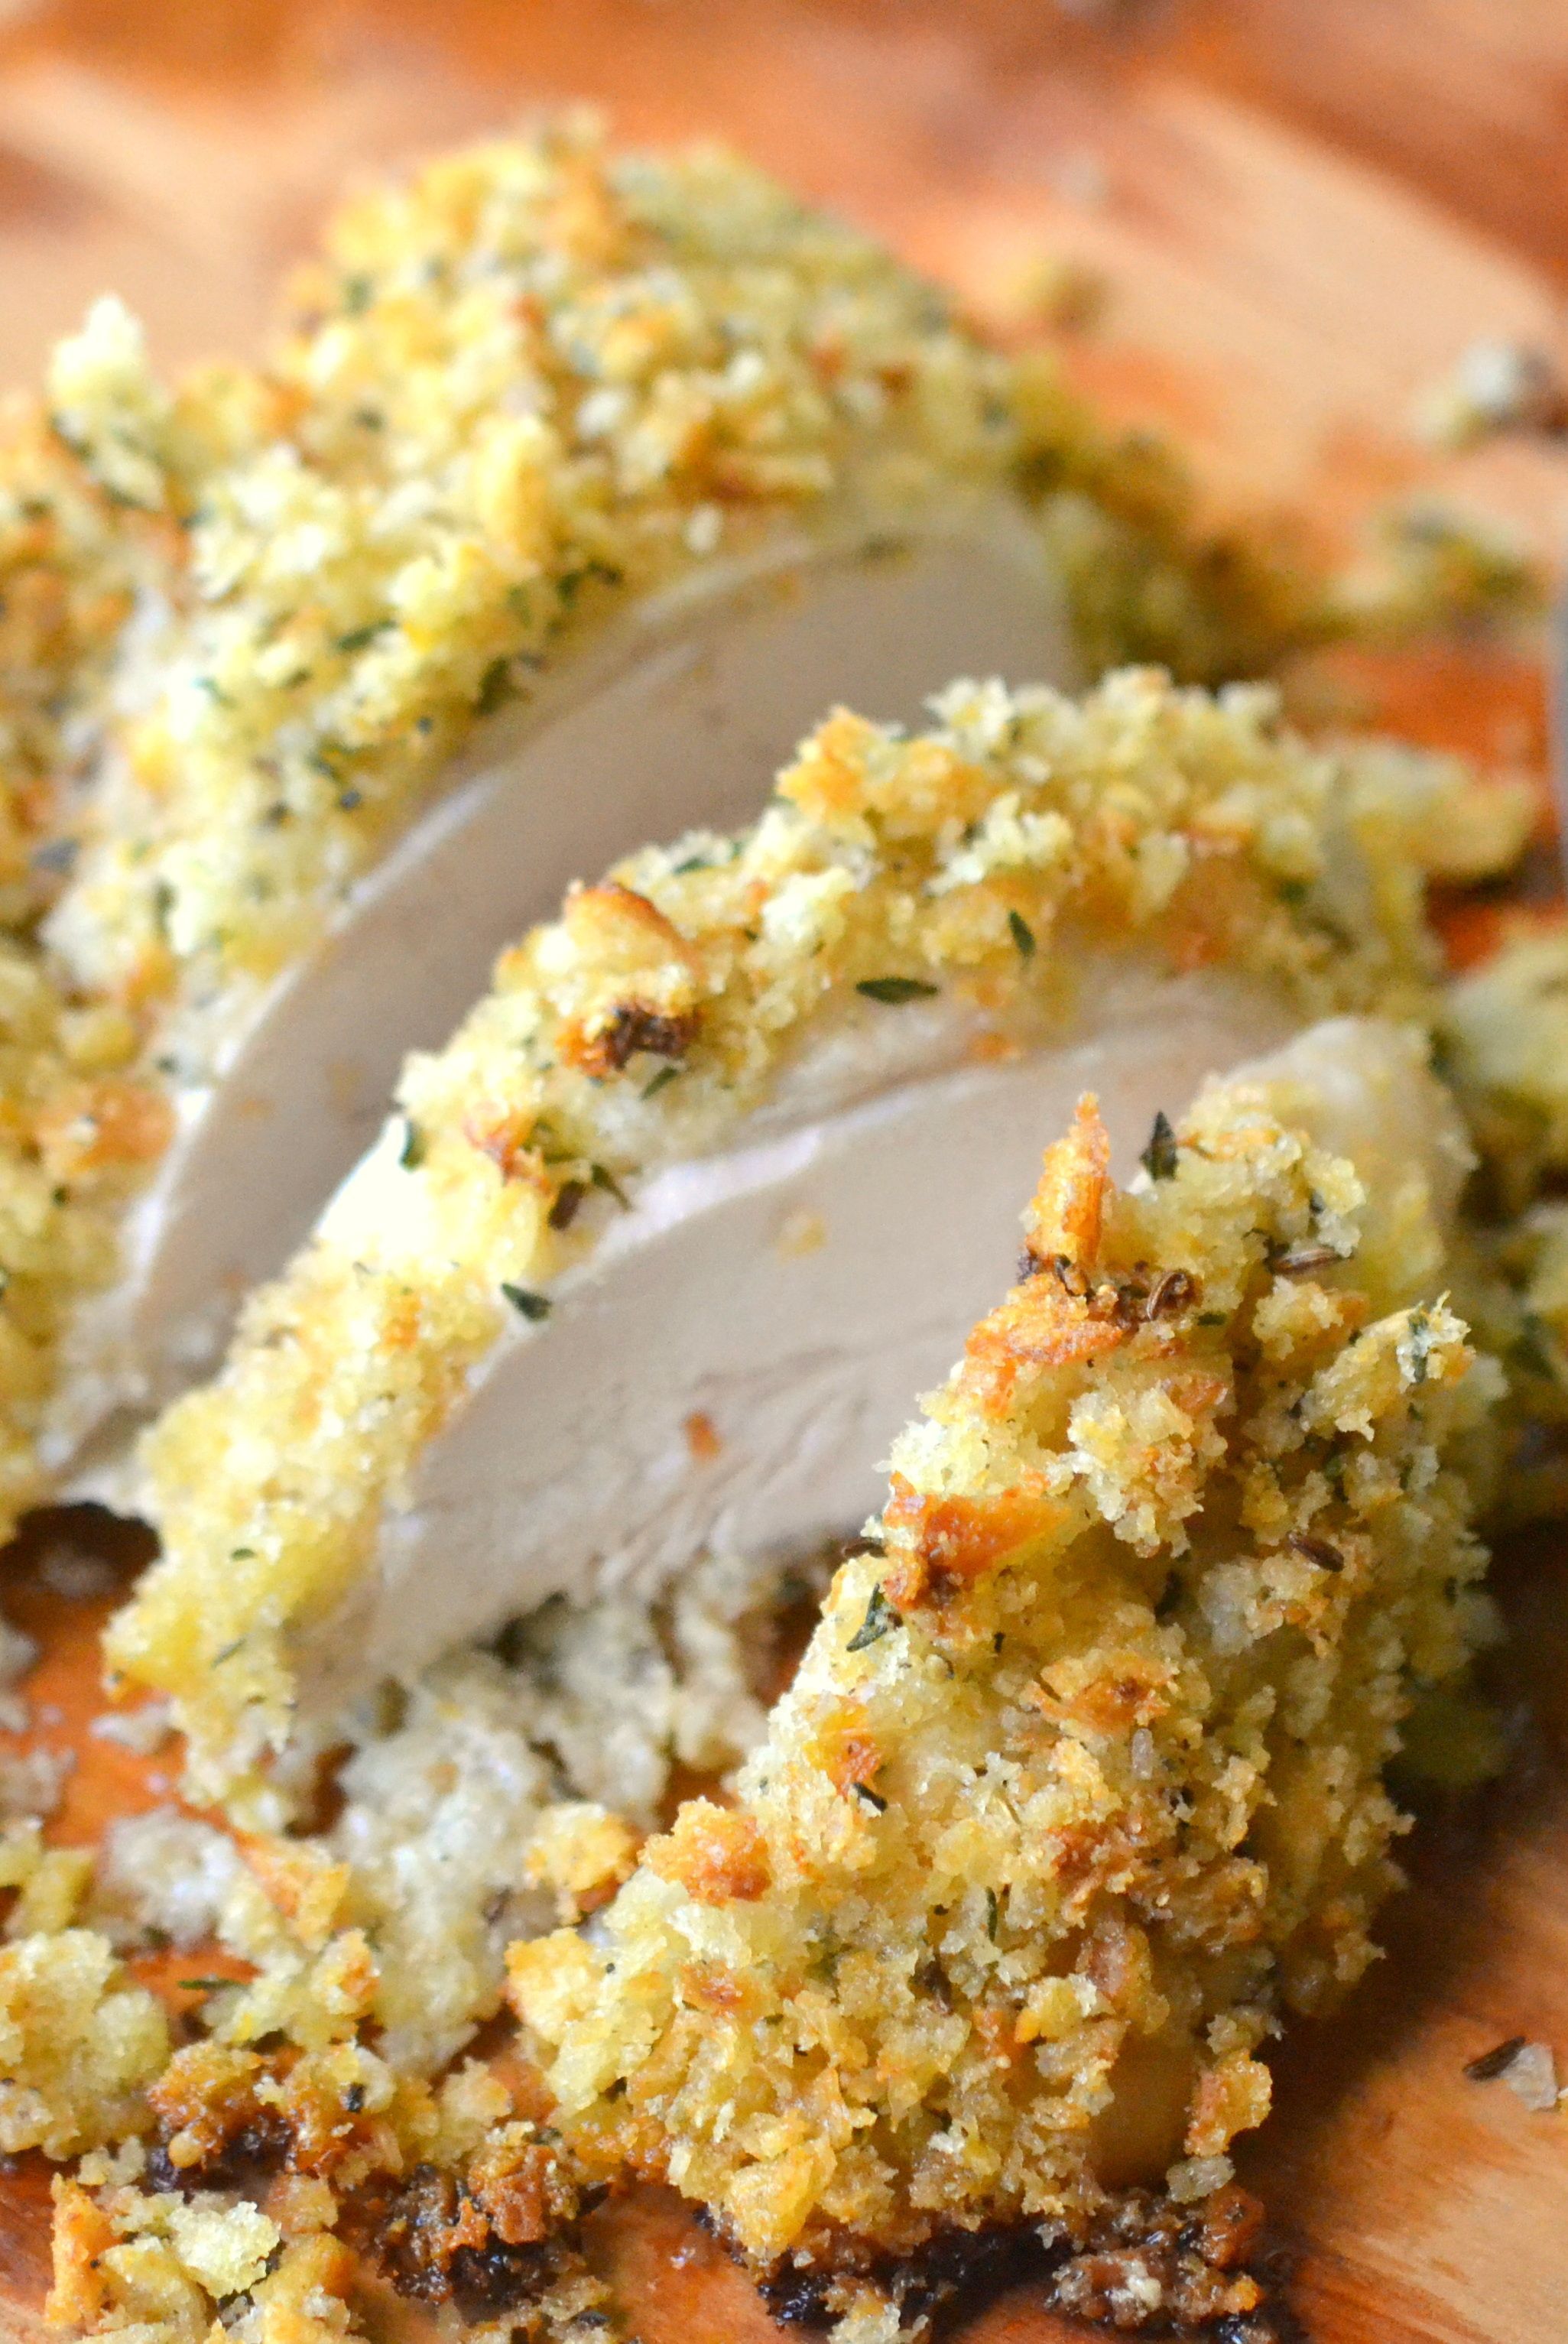 This wonderful chicken is roasted with a zippy mustard,herb and lemon breadcrumb crust — Ina is the best!